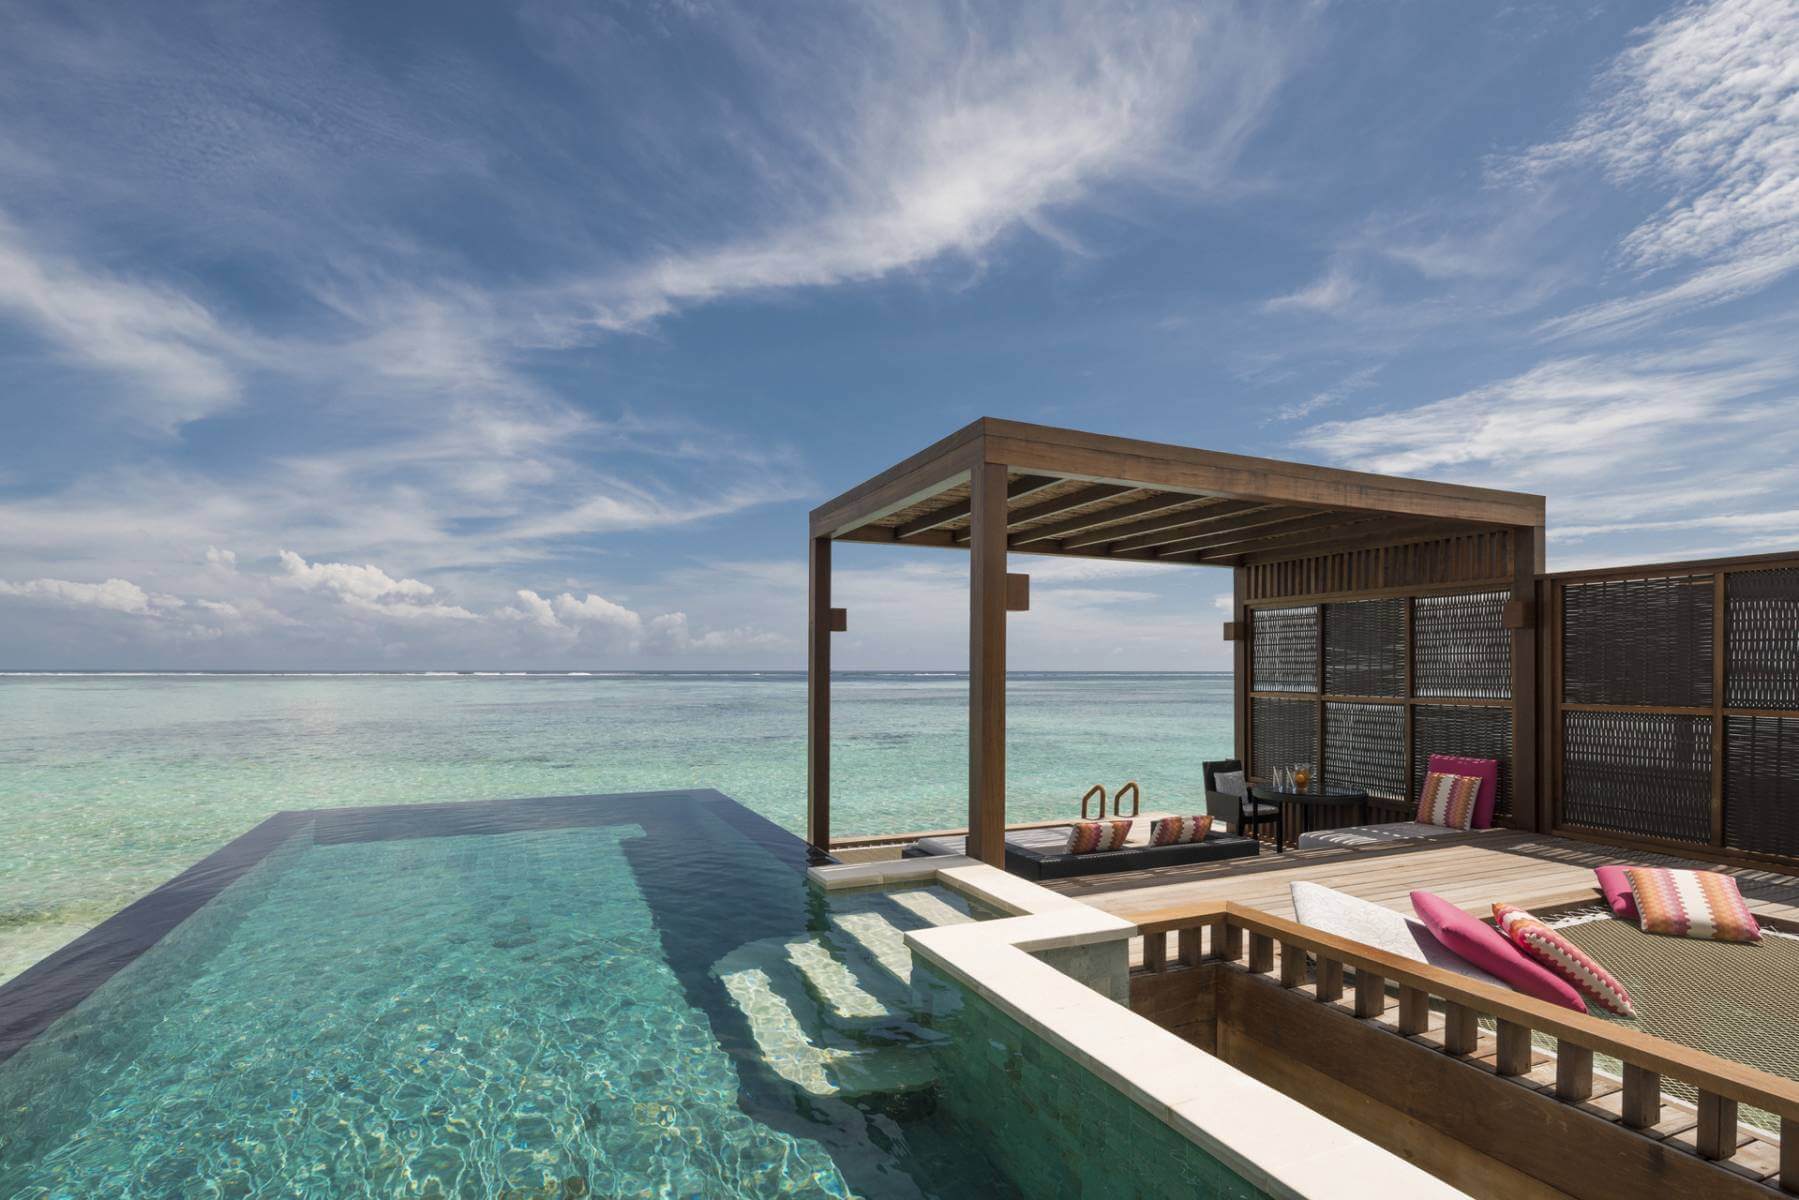 The Maldives - Not as flat as you think